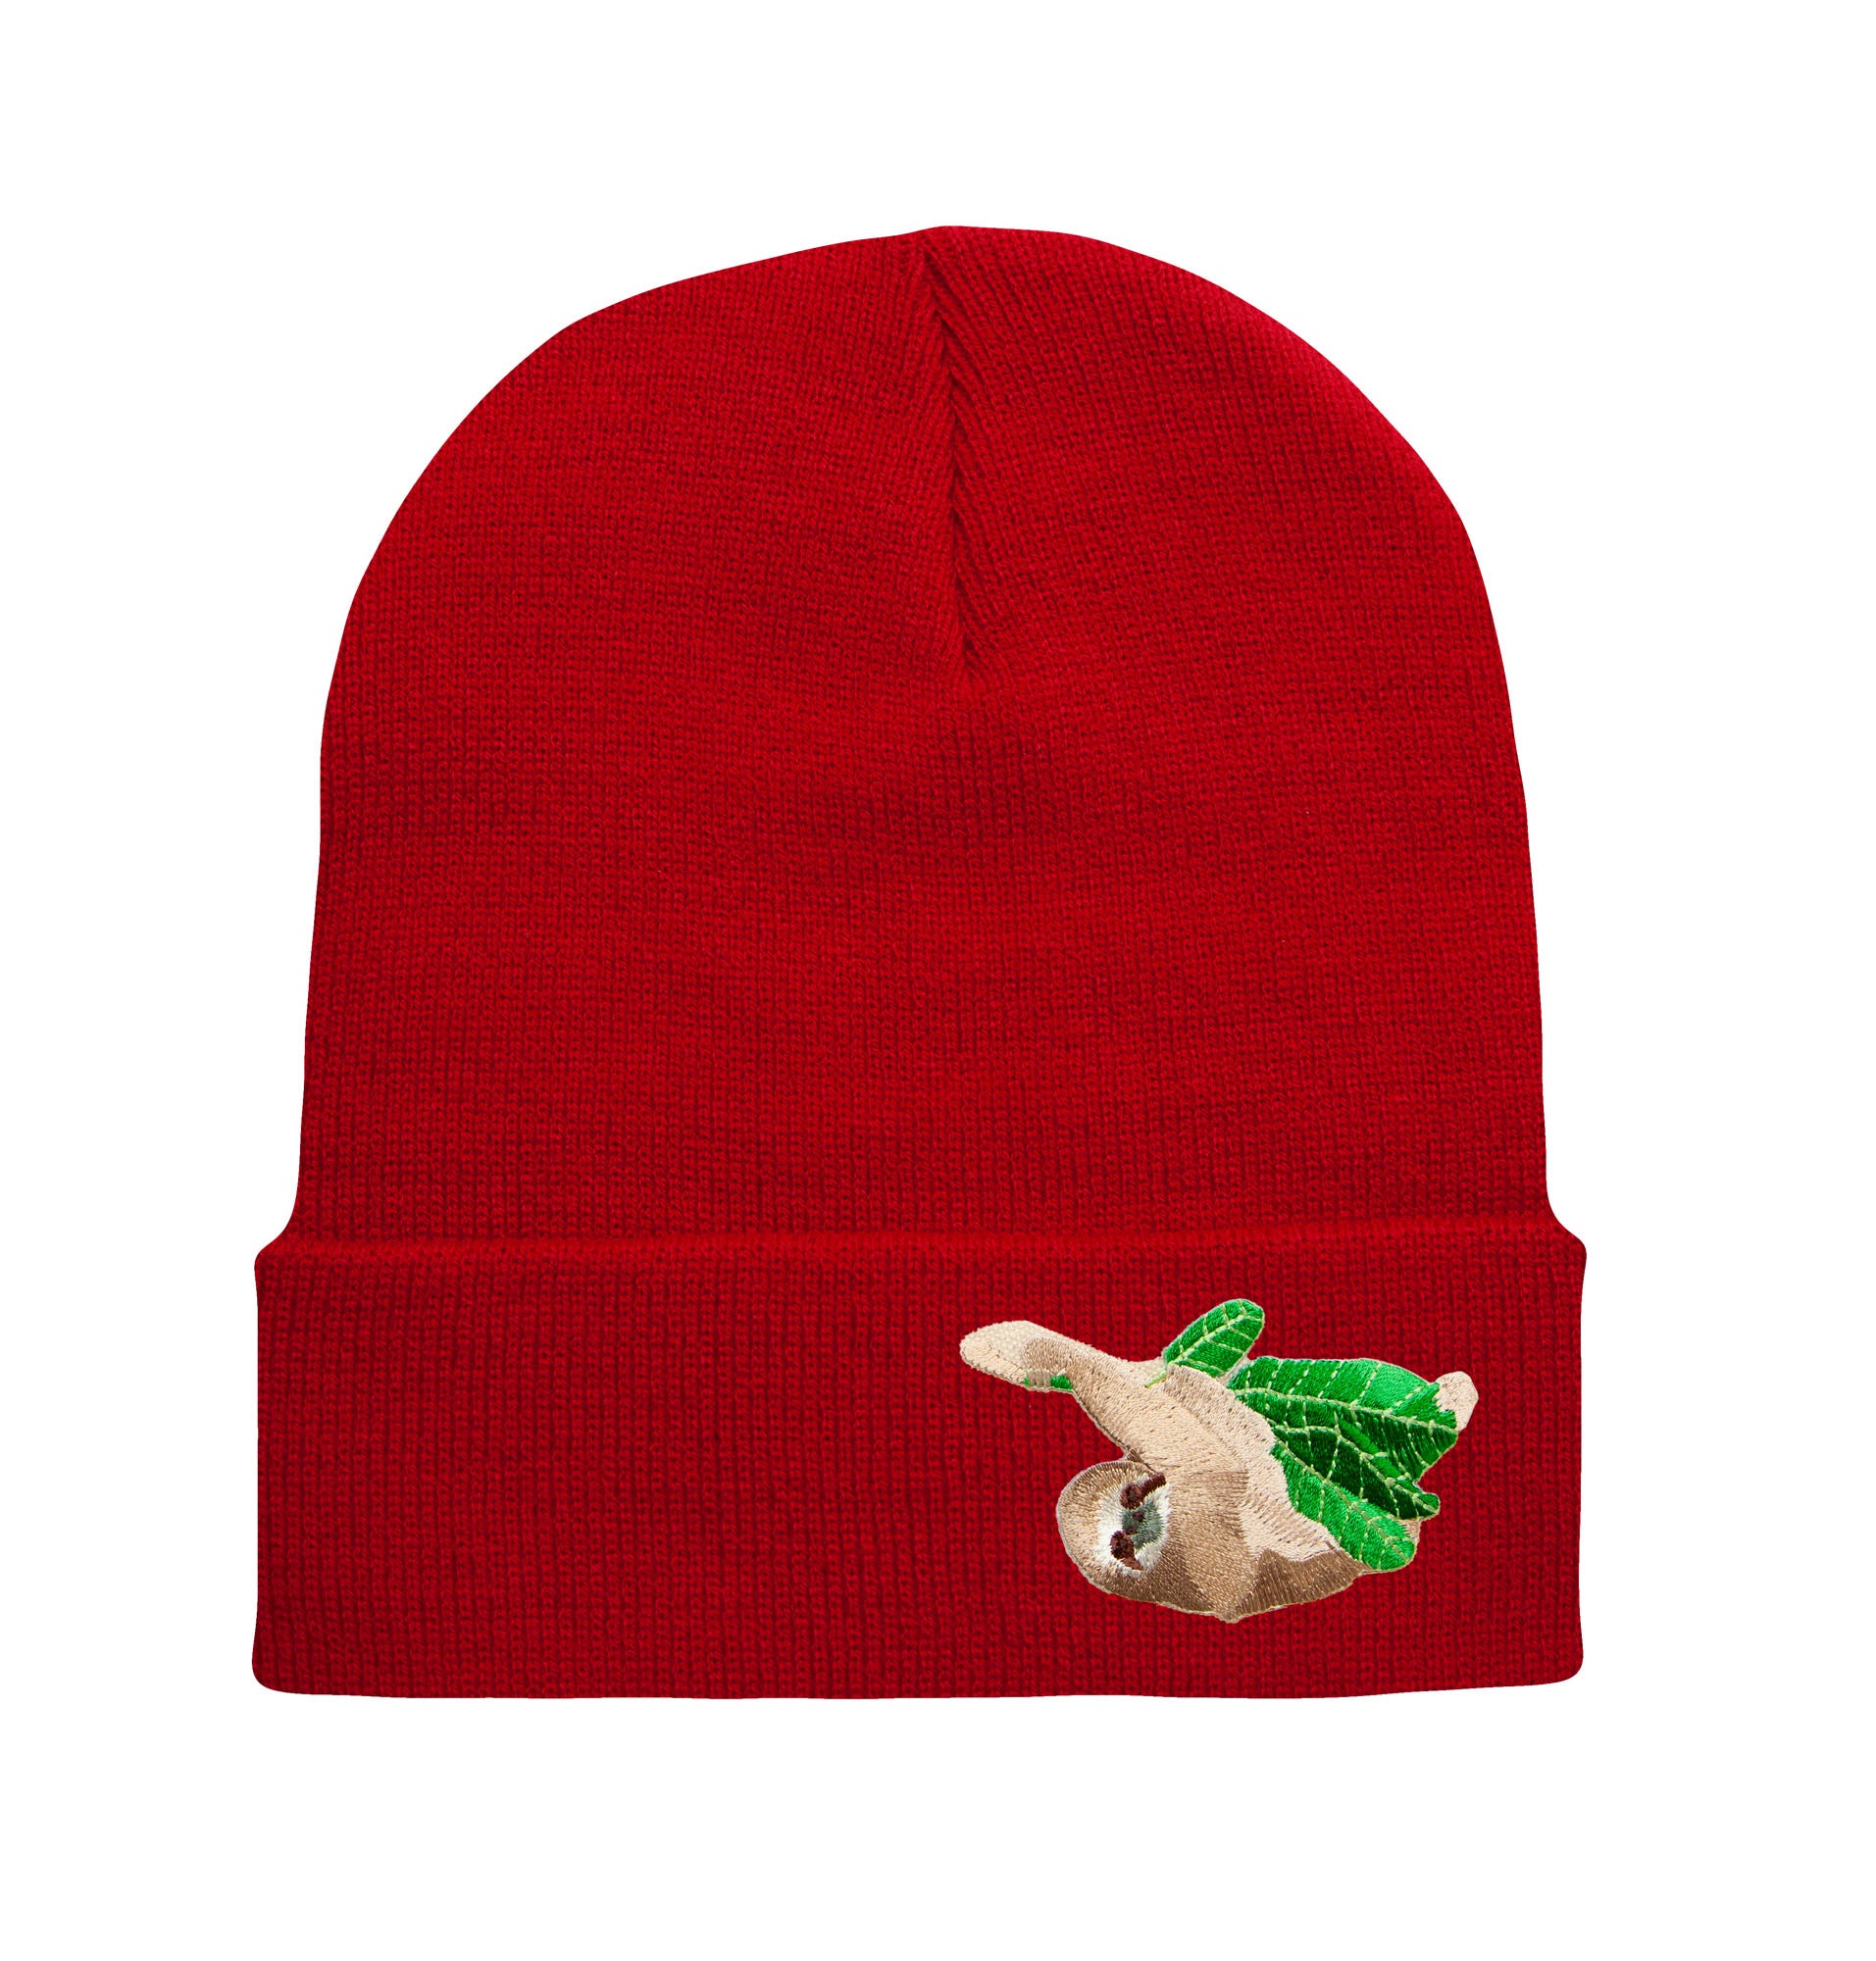 The Hat - Red